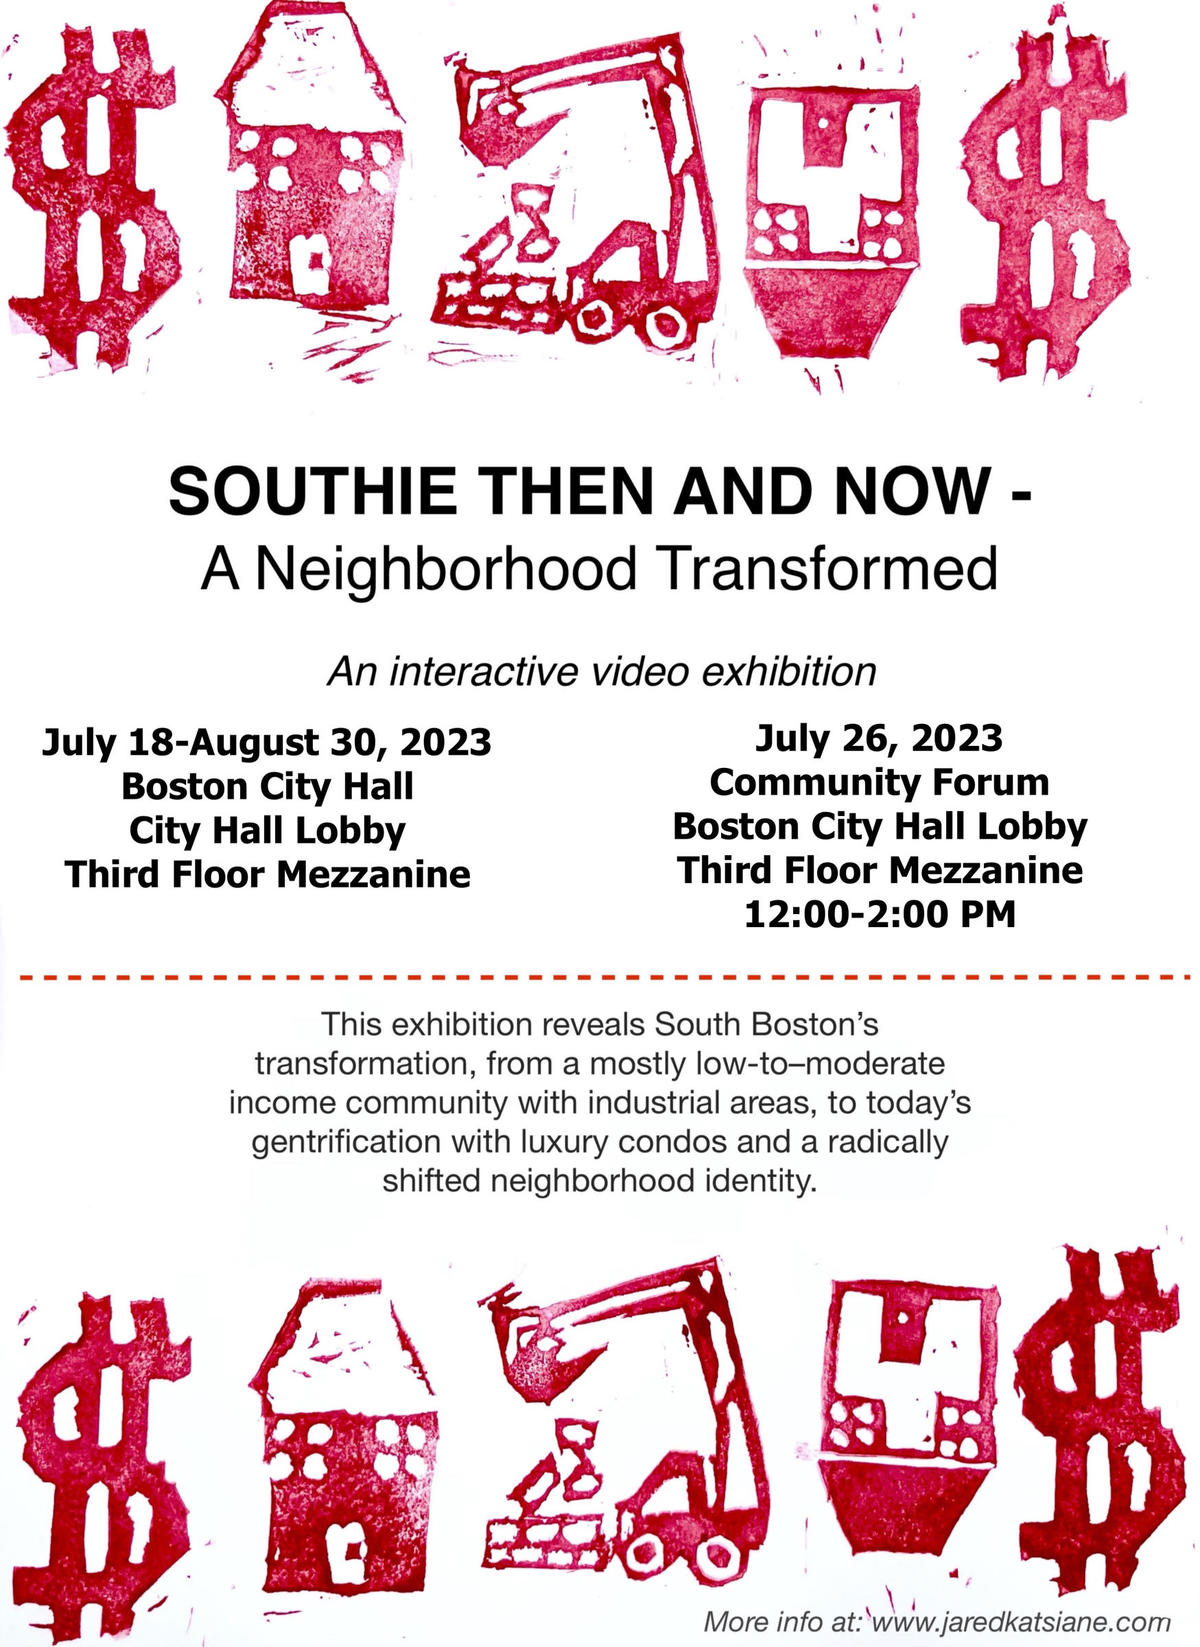 Flyer for SOUTHIE THEN AND NOW community forum on July 26